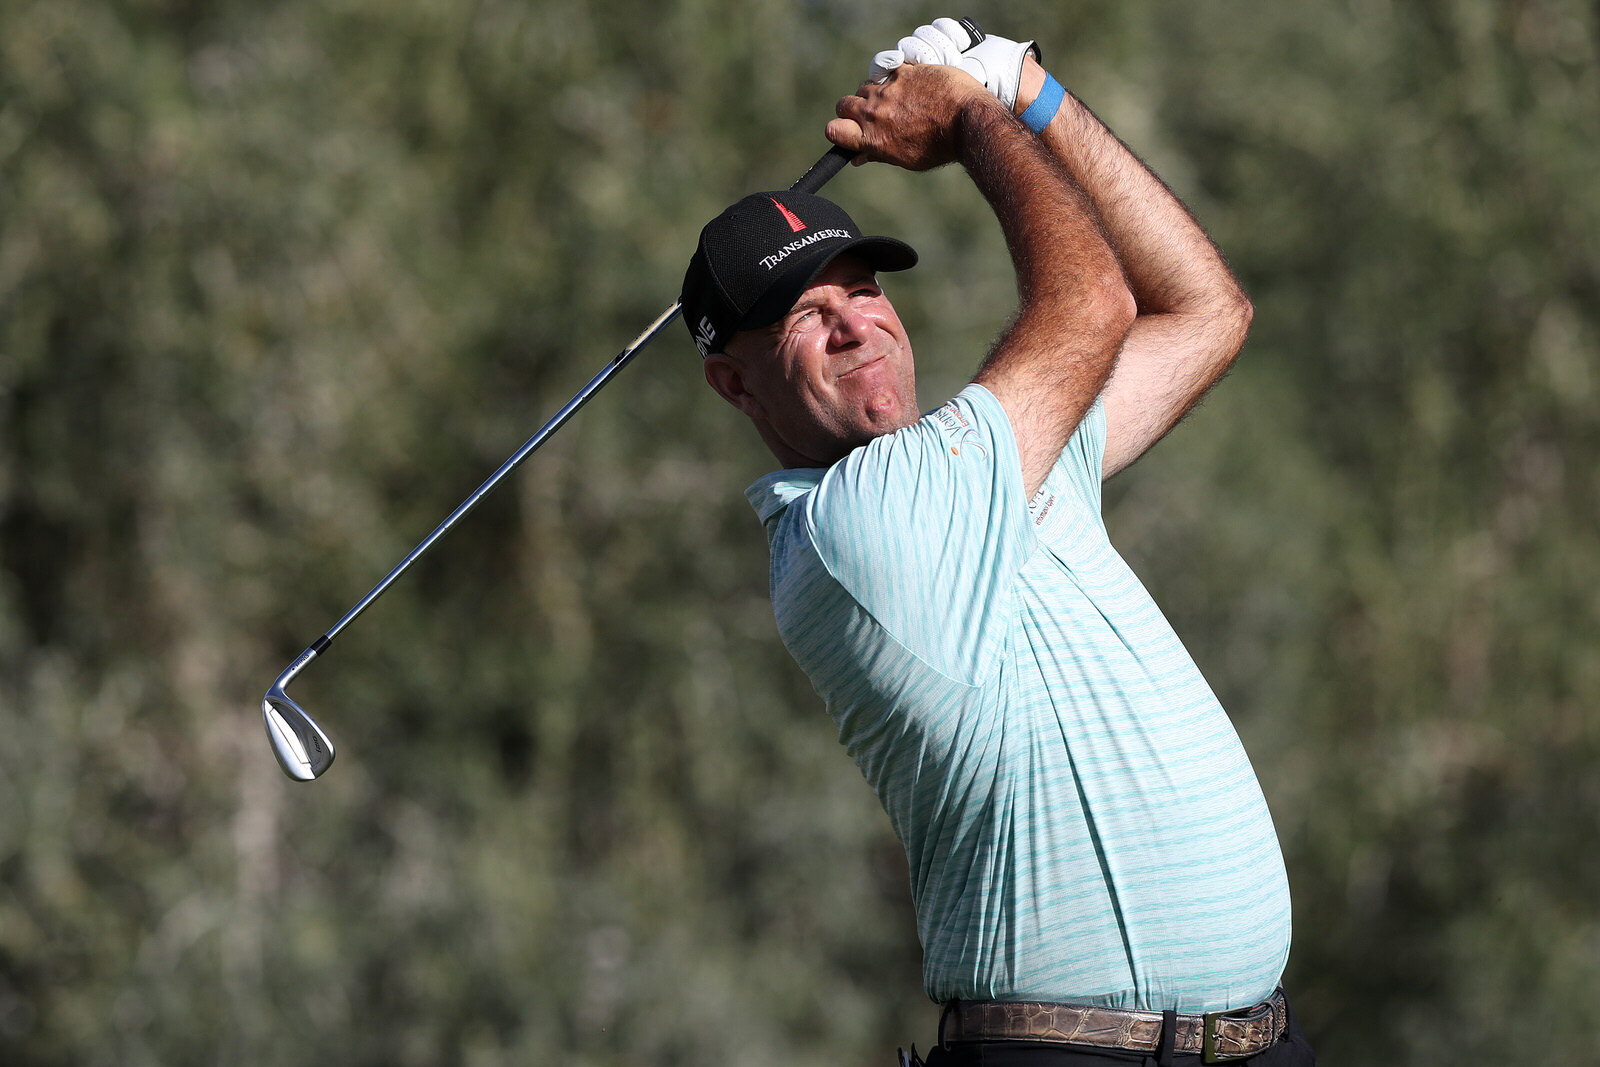  LAS VEGAS, NEVADA - OCTOBER 09: Stewart Cink hits his tee shot on the 14th hole during round two of the Shriners Hospitals For Children Open at TPC Summerlin on October 09, 2020 in Las Vegas, Nevada. (Photo by Matthew Stockman/Getty Images) 